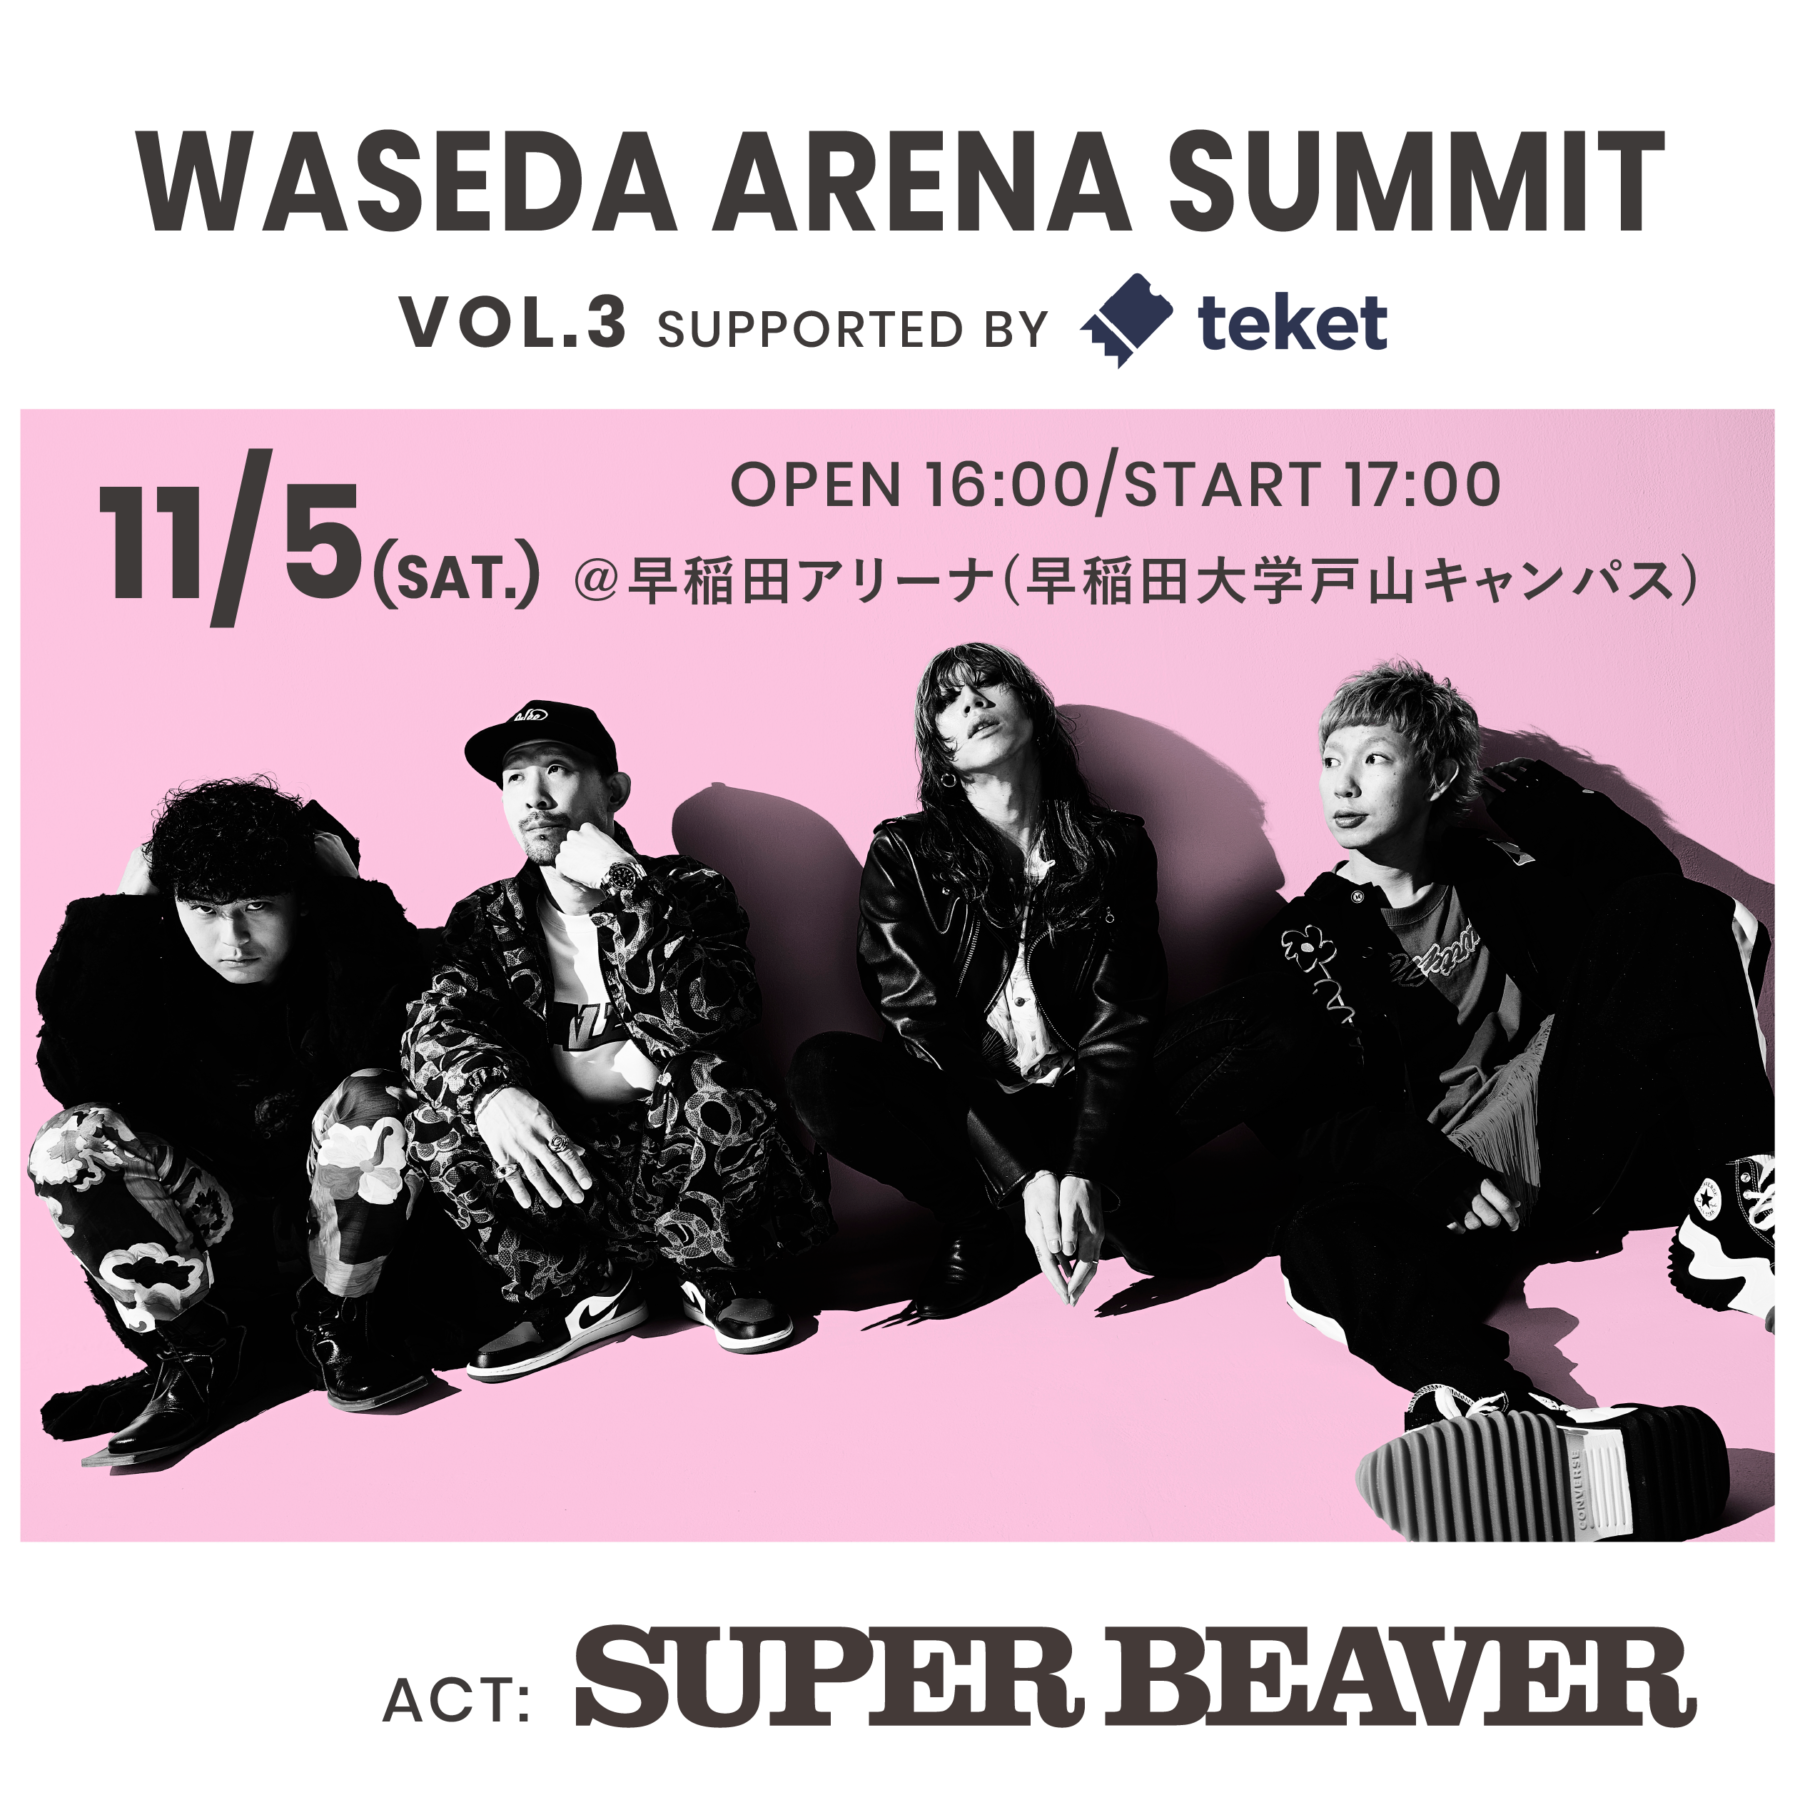 WASEDA ARENA SUMMIT Vol.3 Supported by teket